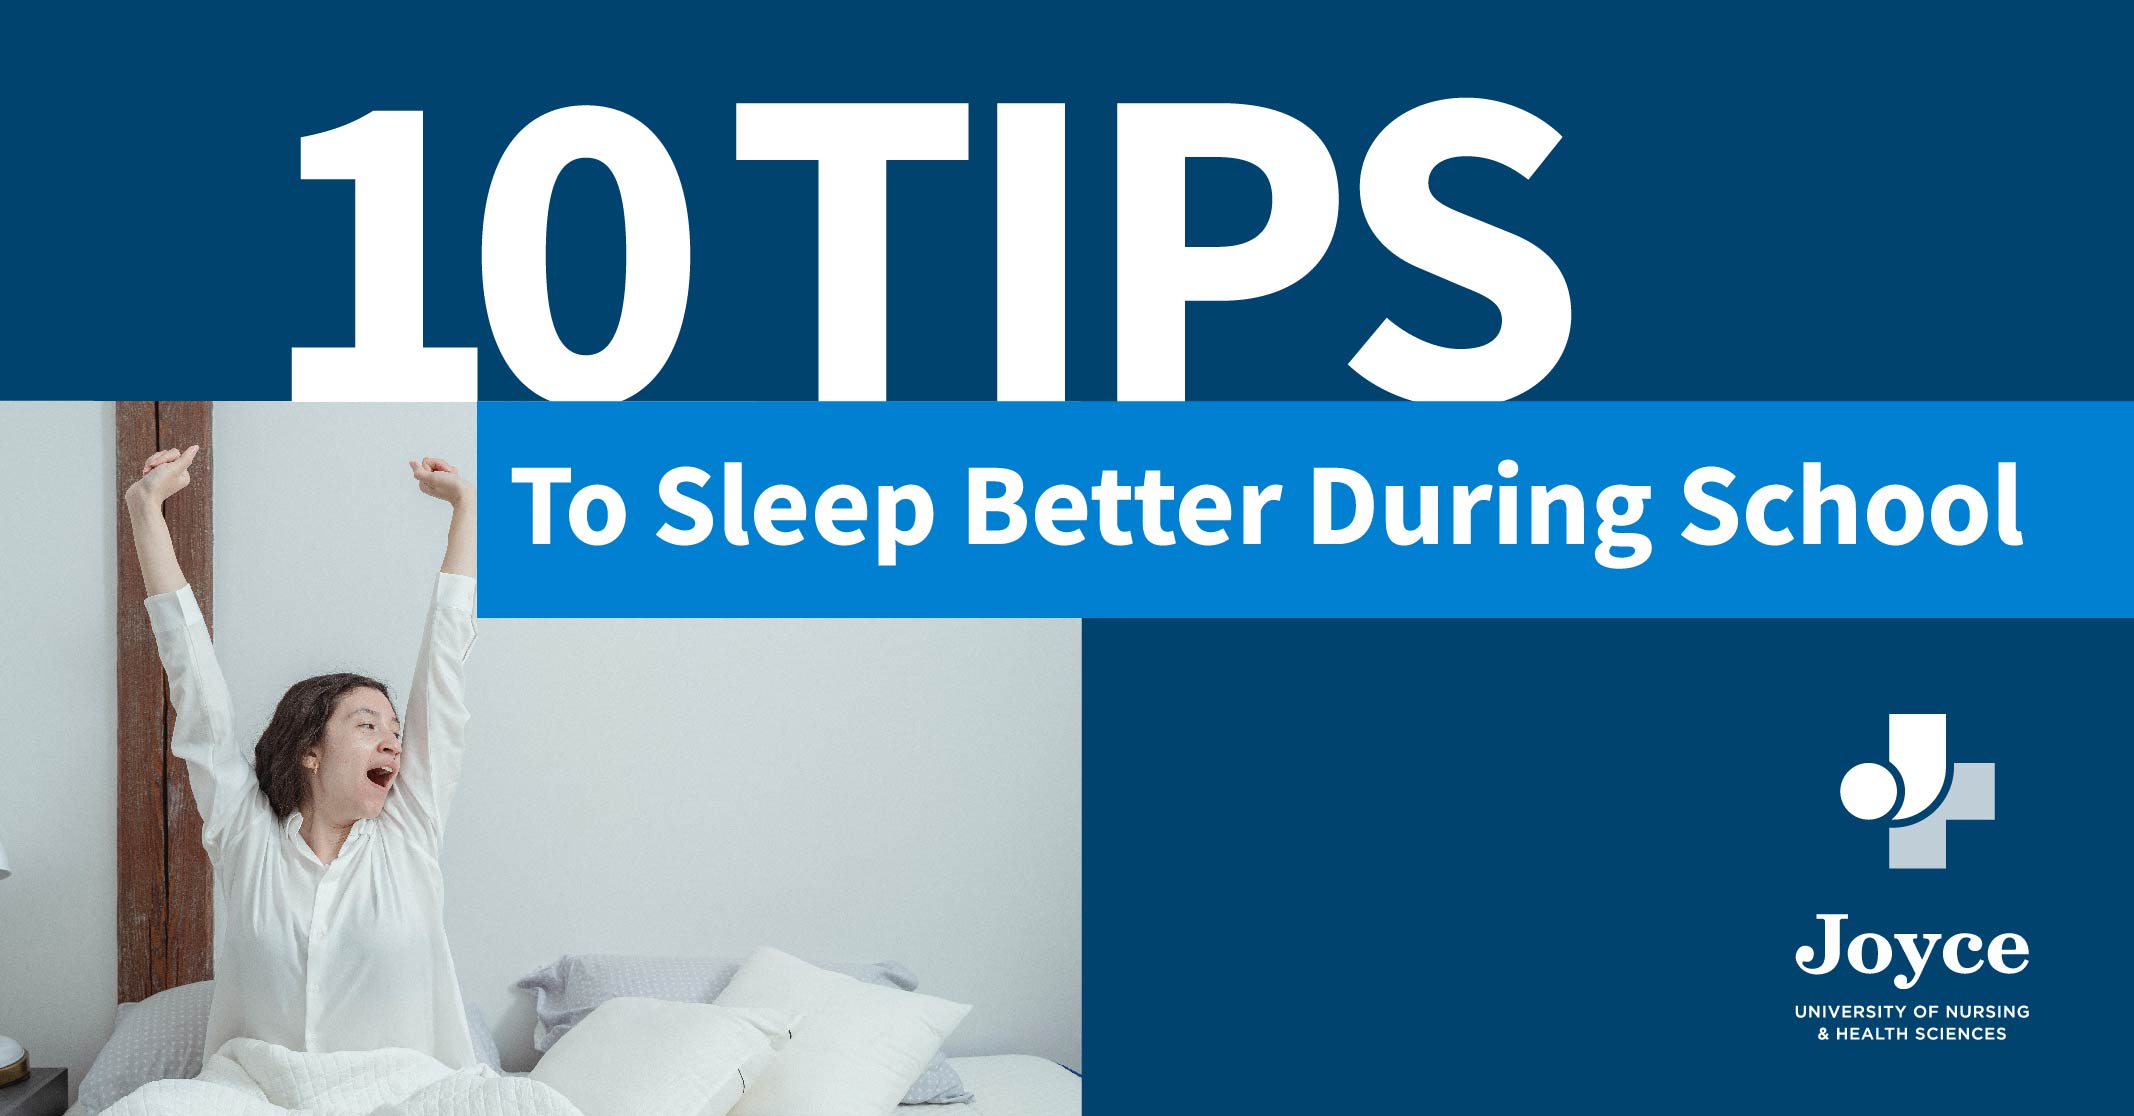 person stretching in bed with text overlay '10 tips to sleep better during school'